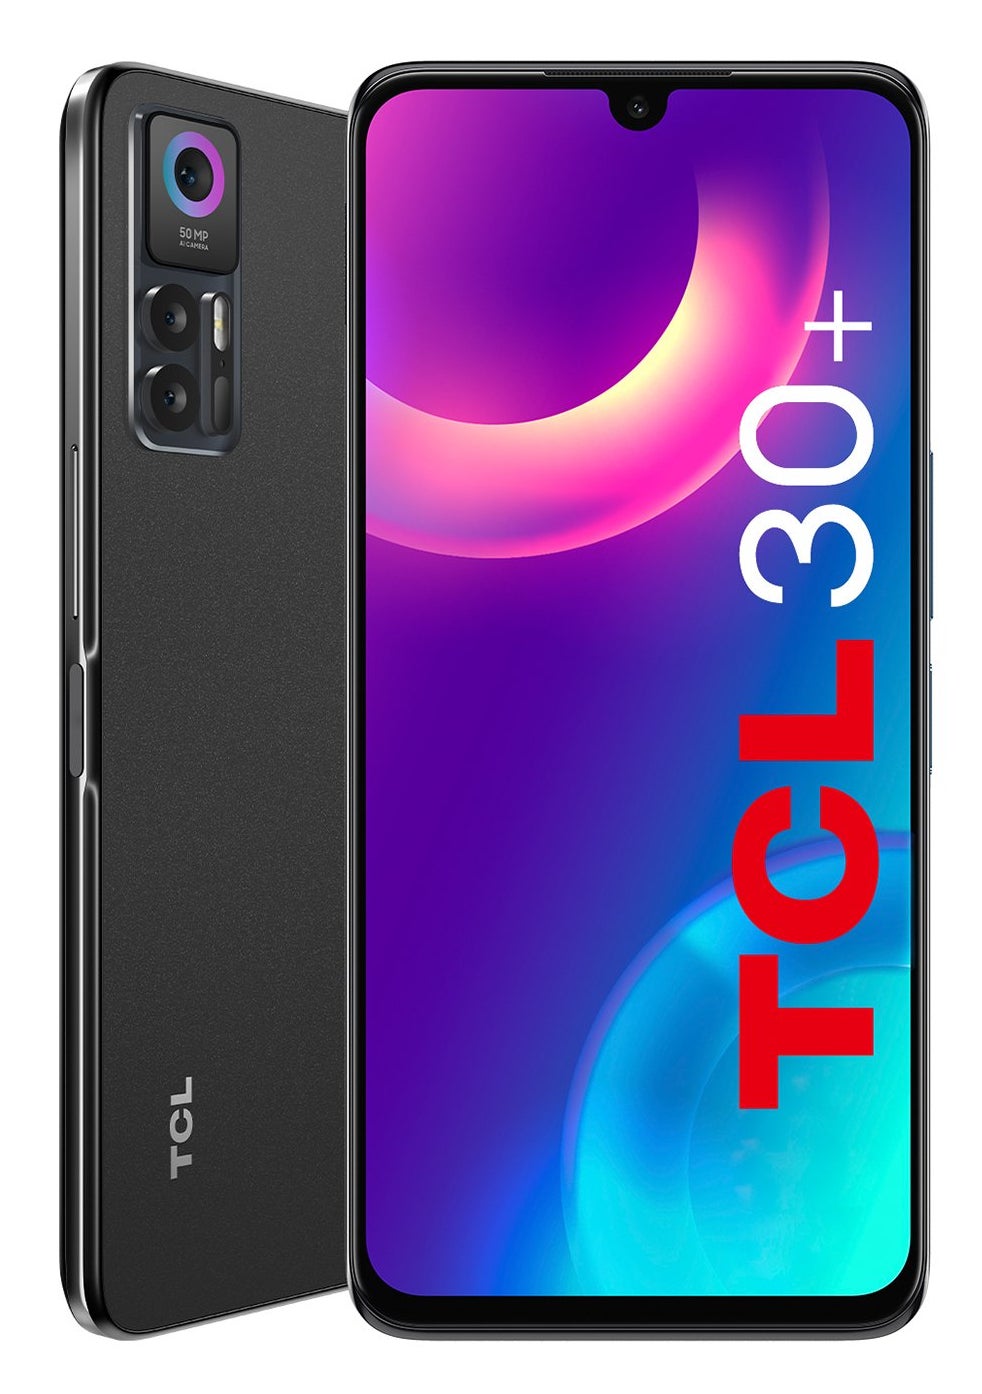 Two of TCL’s upcoming smartphones have just leaked in high-res images